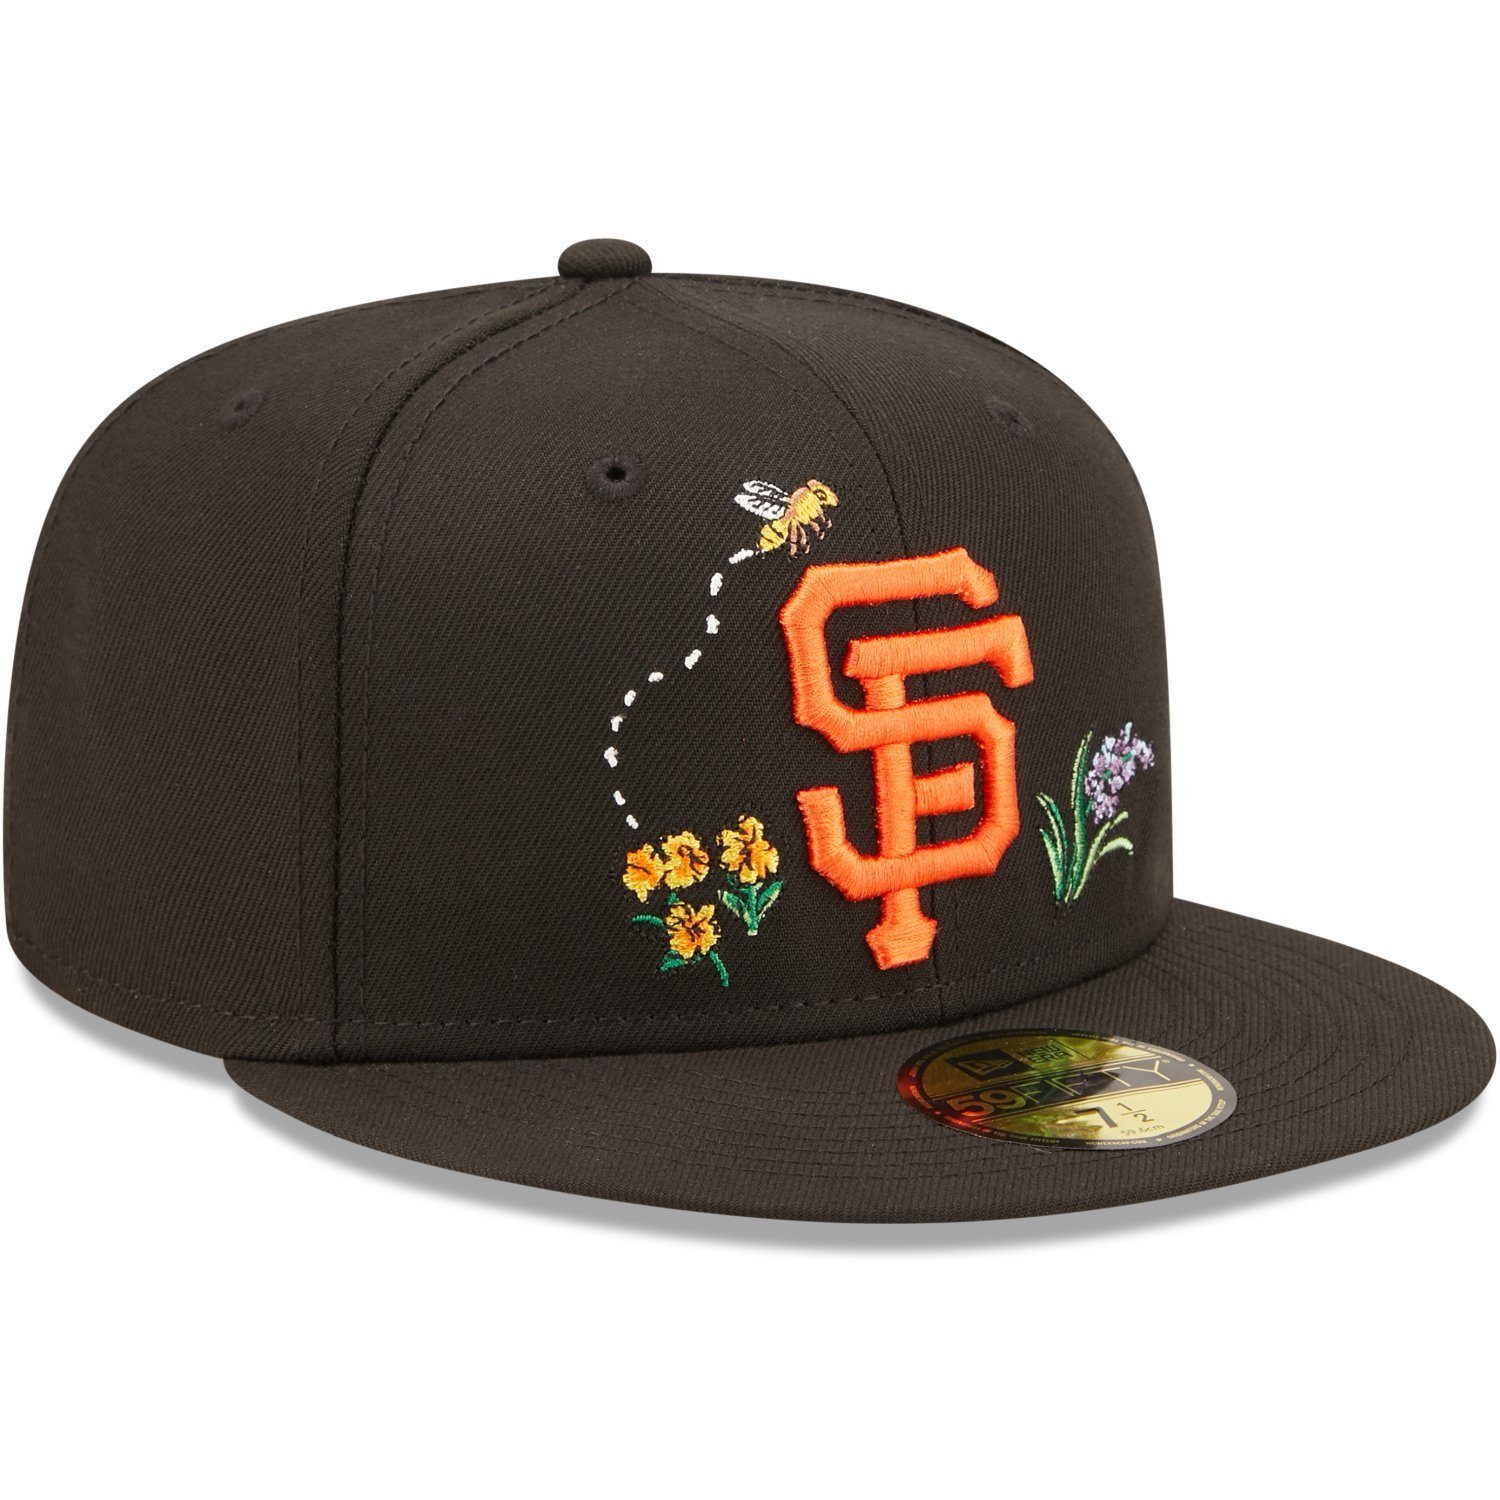 FLORAL New Giants Francisco WATER Era San 59Fifty Fitted Cap